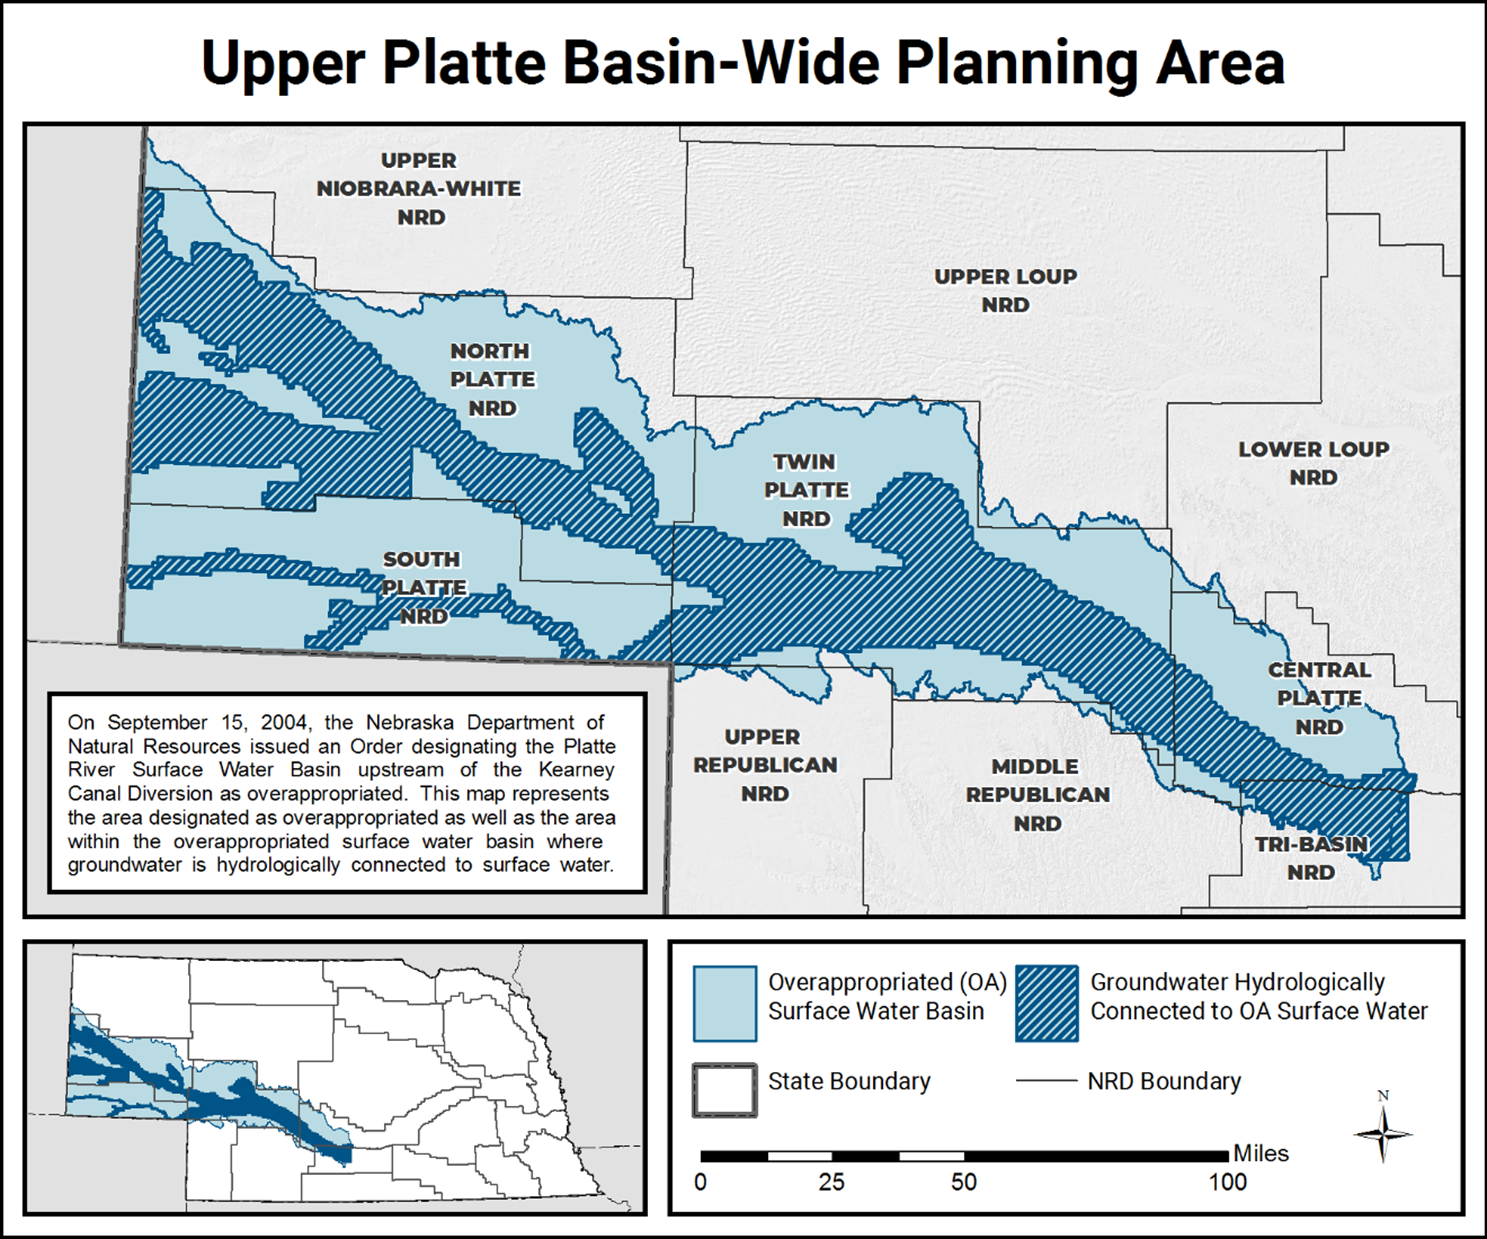 Upper Platte Basin-Wide Planning Area map. This map displays the Overappropriated (OA) Surface Water Basin area and the Groundwater Hydrologically Connected to OA Surface Water area.